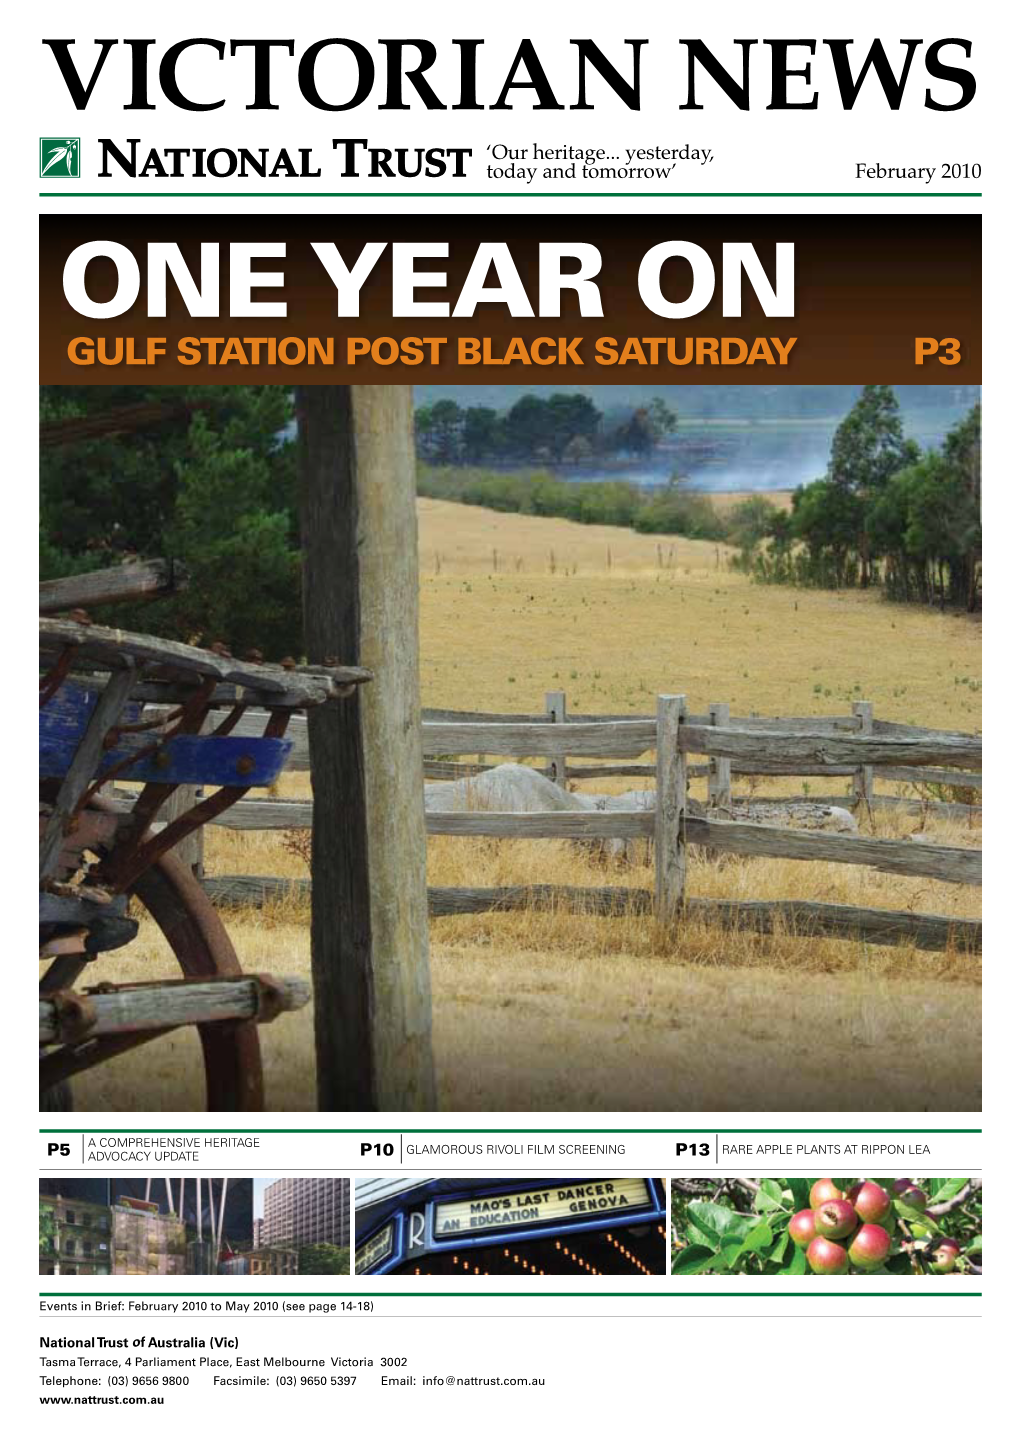 Victorian News One Year On